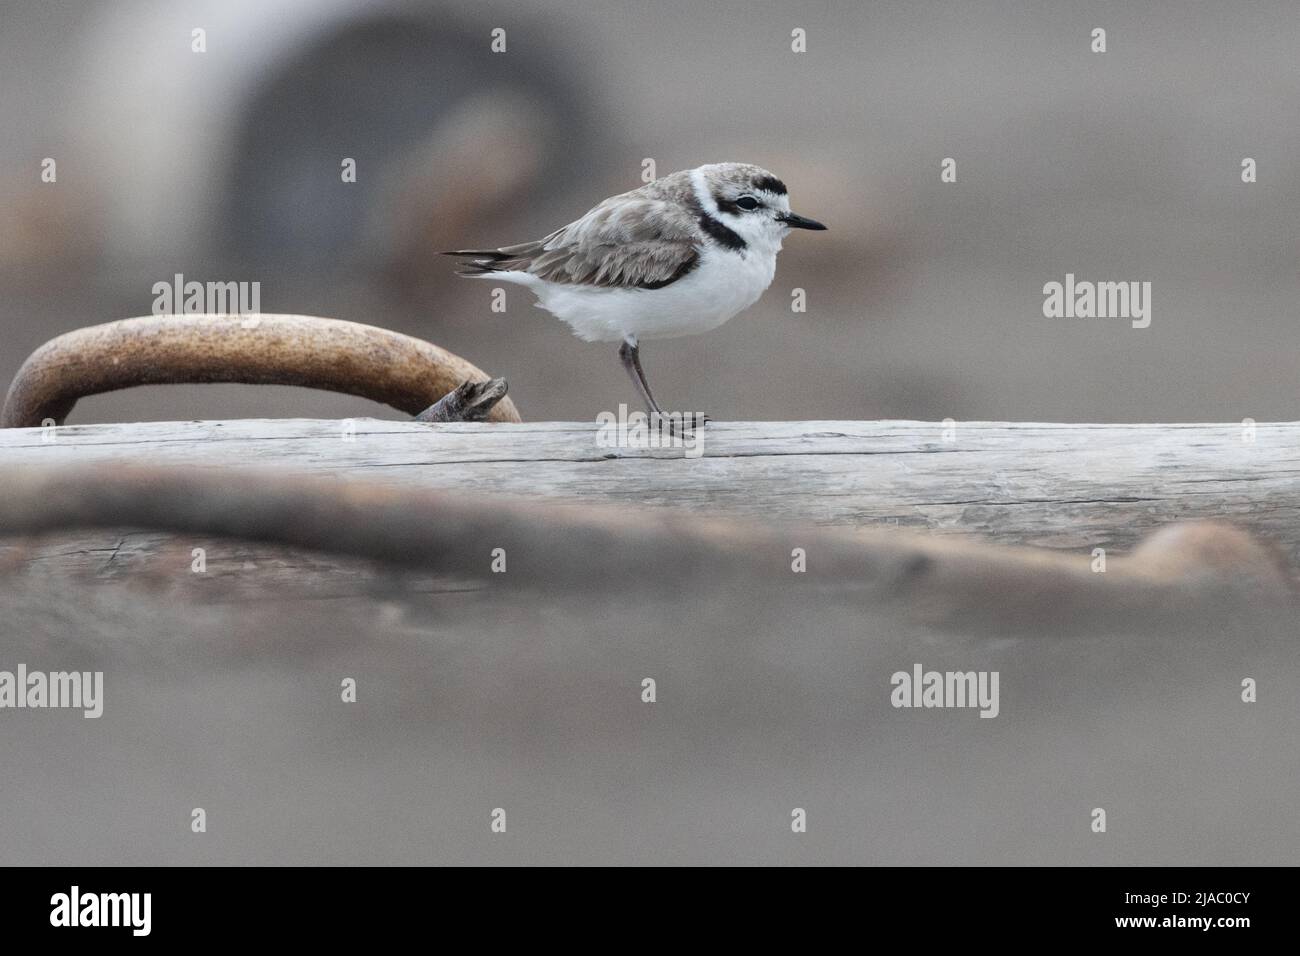 A western snowy plover (Charadrius nivosus), a threatened bird species on the beach in Point Reyes National Seashore in California. Stock Photo